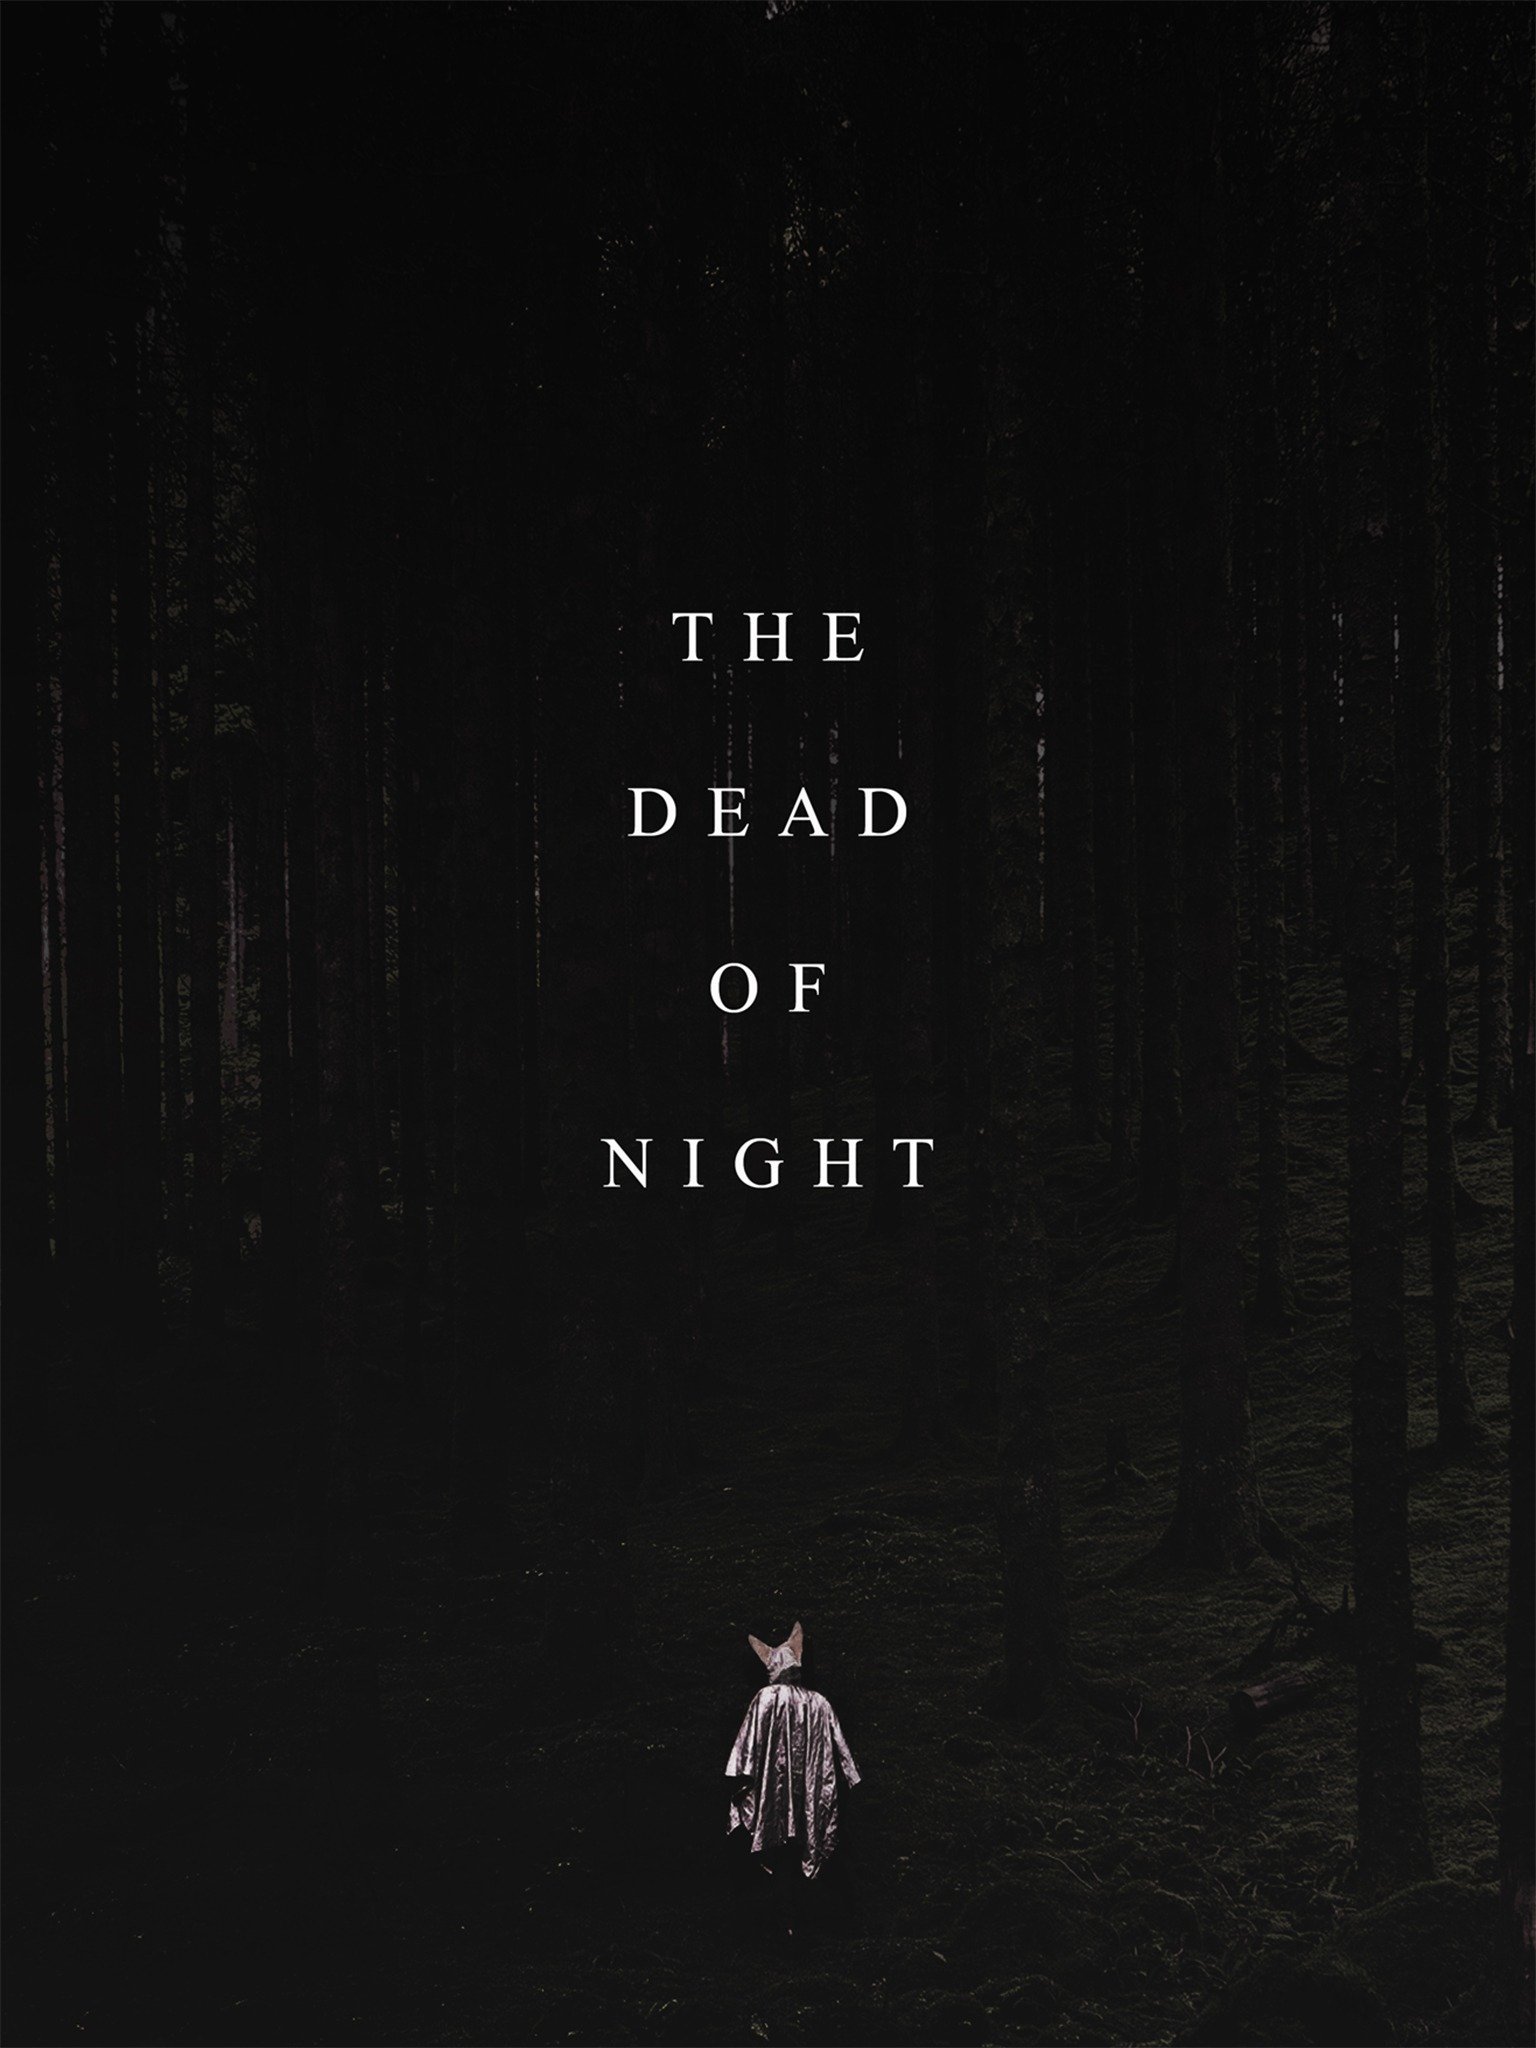 What is the dead of night?